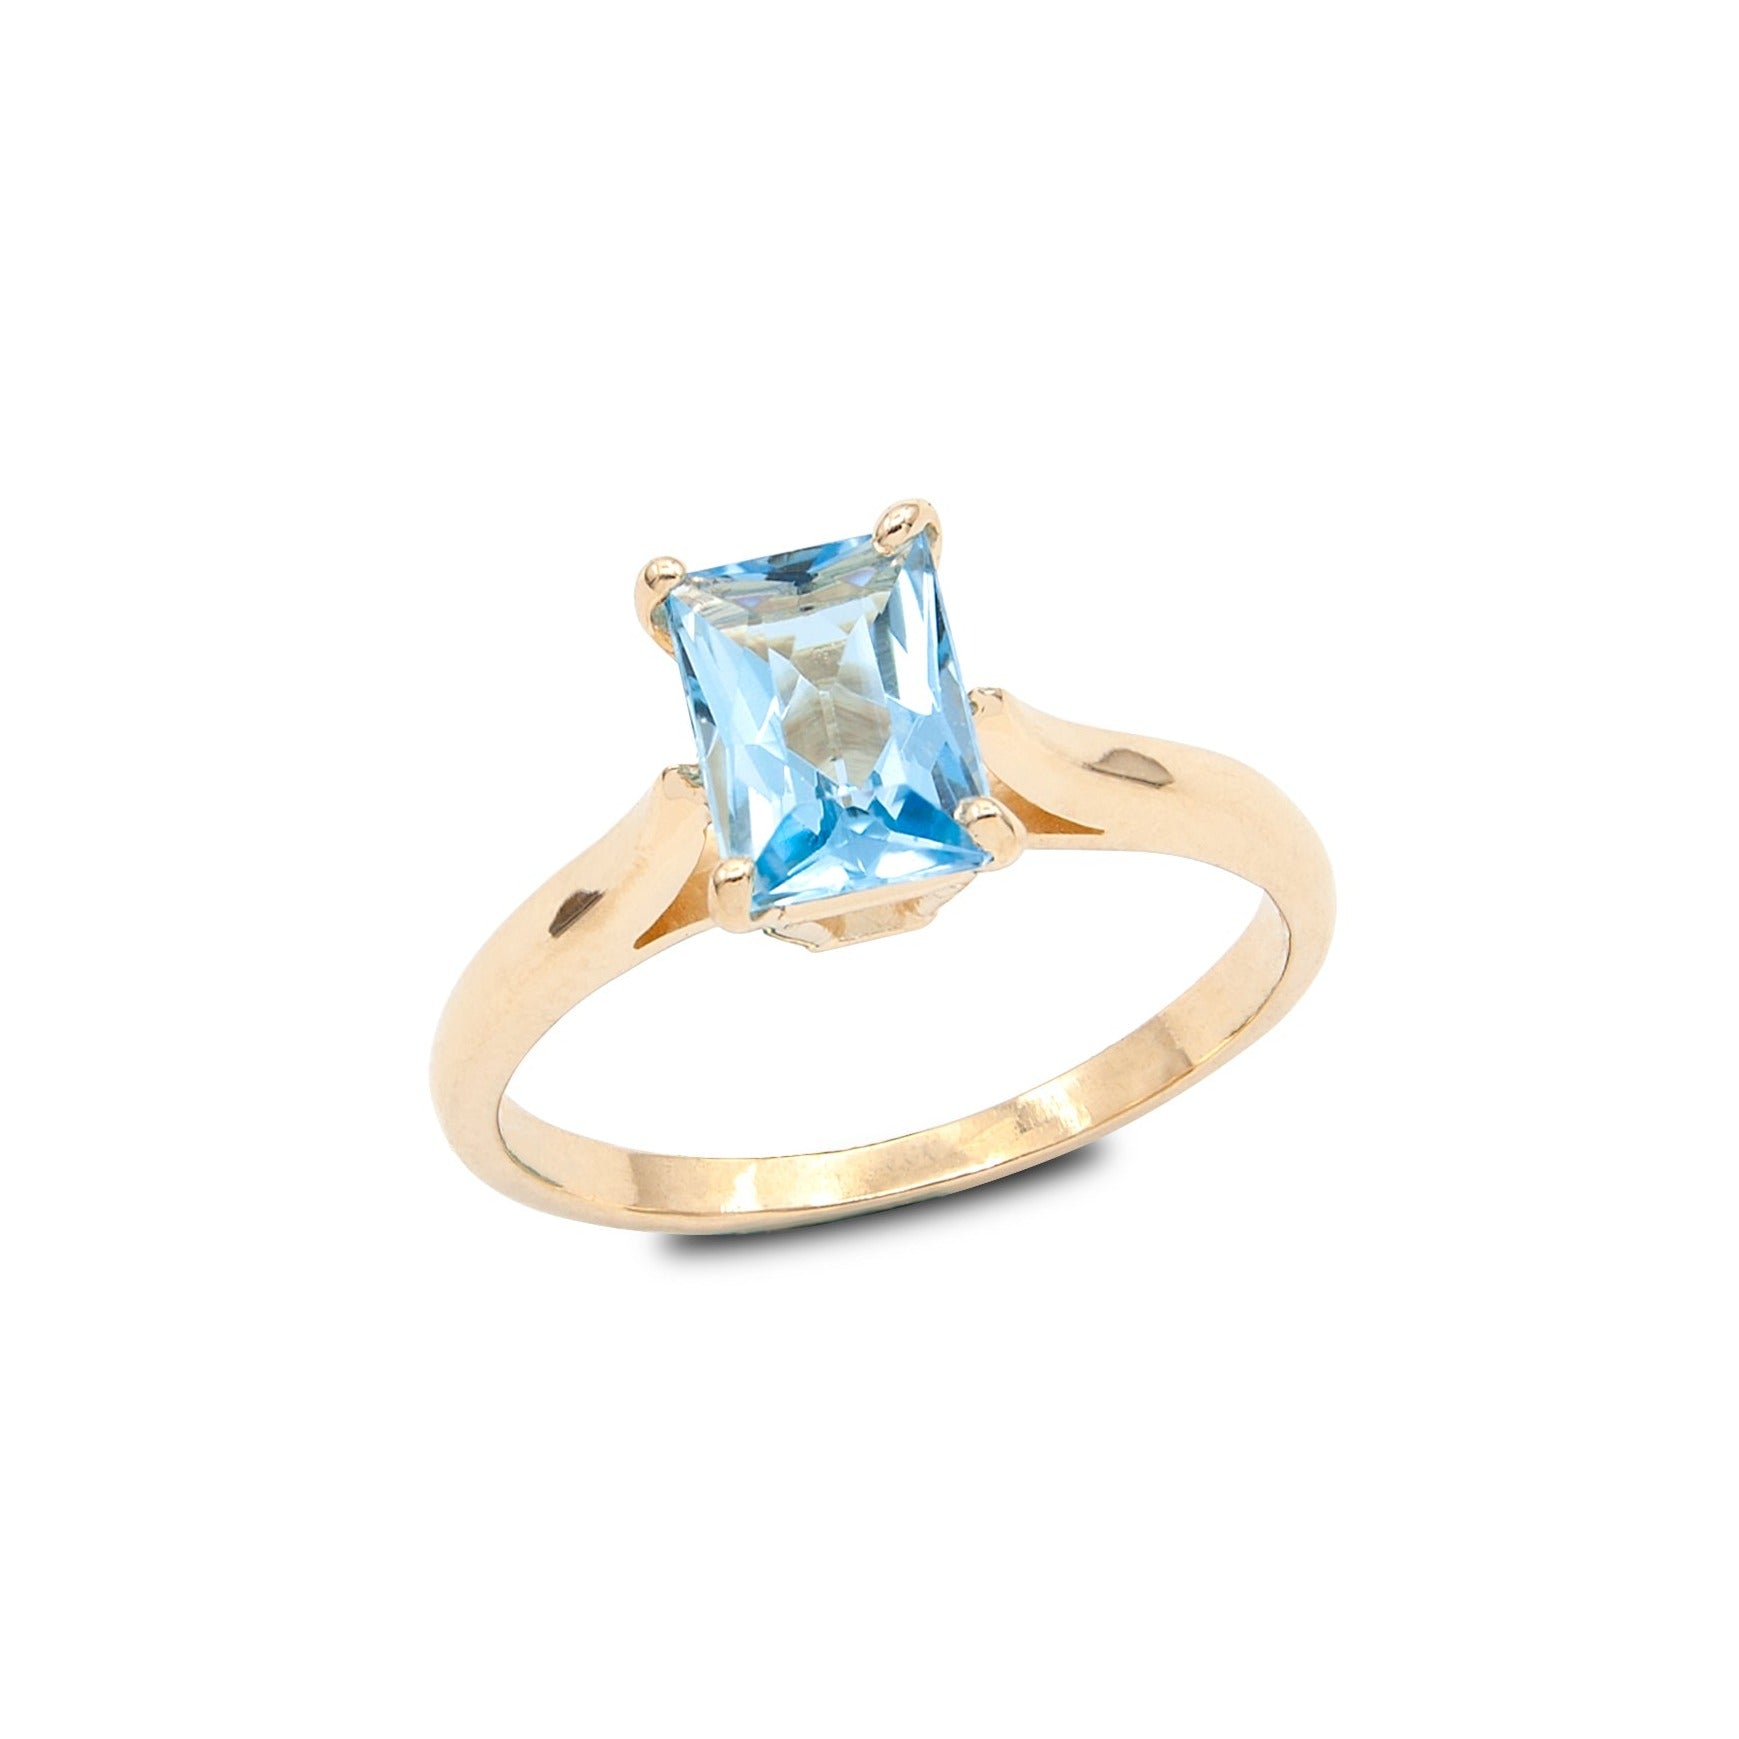 Buy Sky Blue Topaz, Blue and White Diamond Cocktail Ring in Platinum Over  Sterling Silver,Statement Ring For Women 24.40 ctw (Size 6.0) at ShopLC.